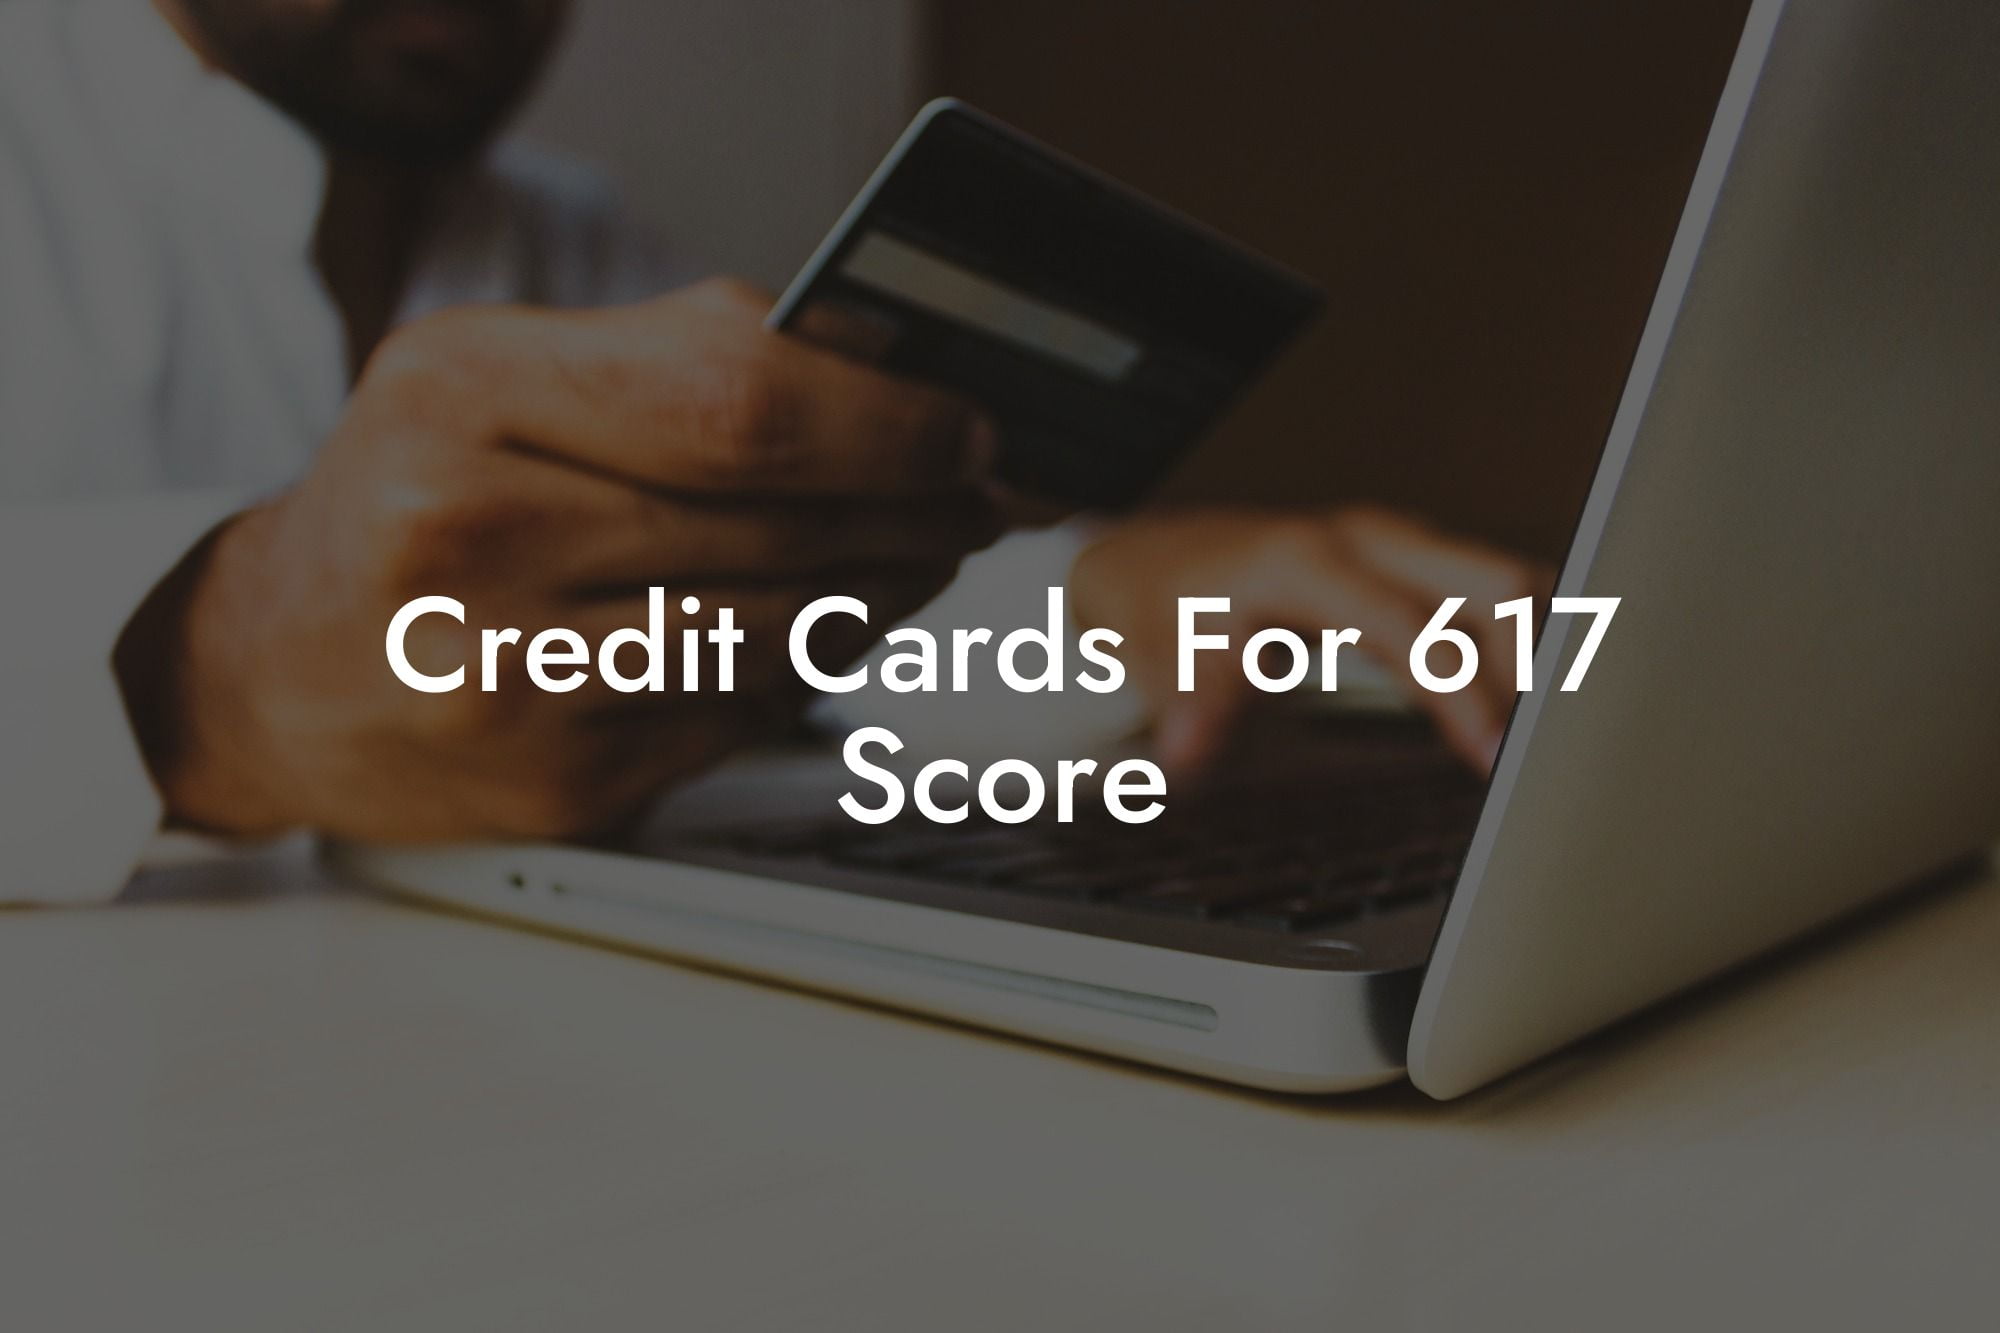 Credit Cards For 617 Score